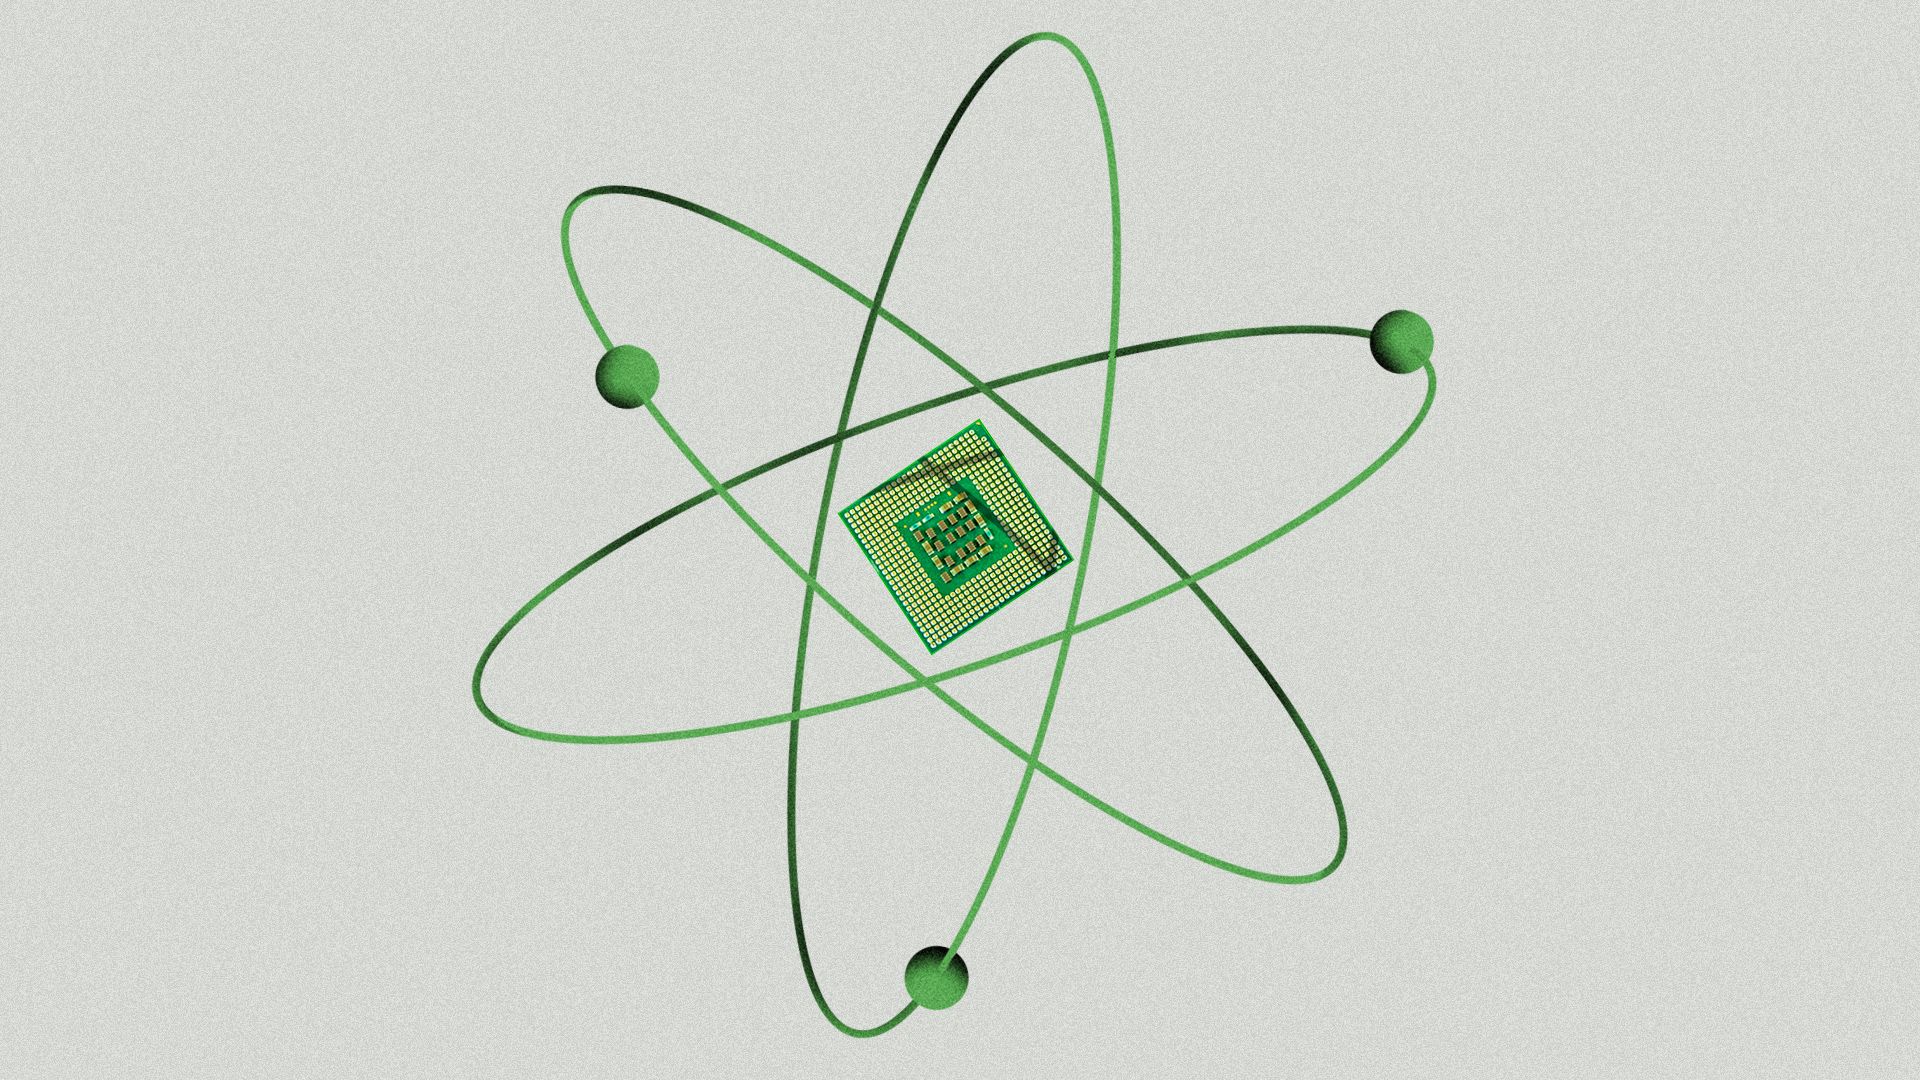 Illustration of a computer chip as an atom.